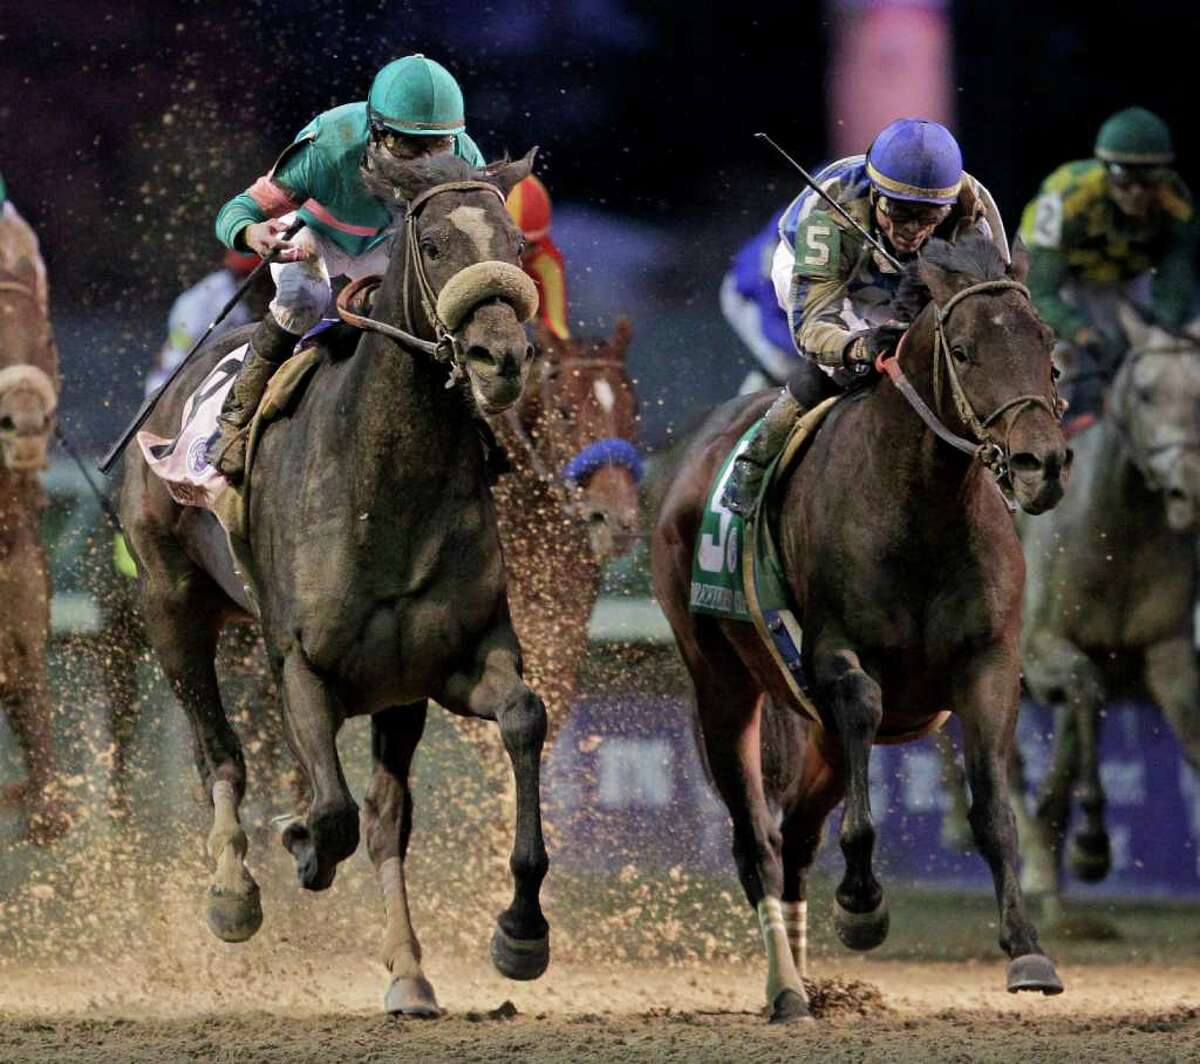 Garrett Gomez, right, rides Blame to victory during the Classic race at the Breeder's Cup horse races at Churchill Downs Saturday, Nov. 6, 2010, in Louisville, Ky. Mike Smith riding Zenyatta finished second. (AP Photo/Darron Cummings)